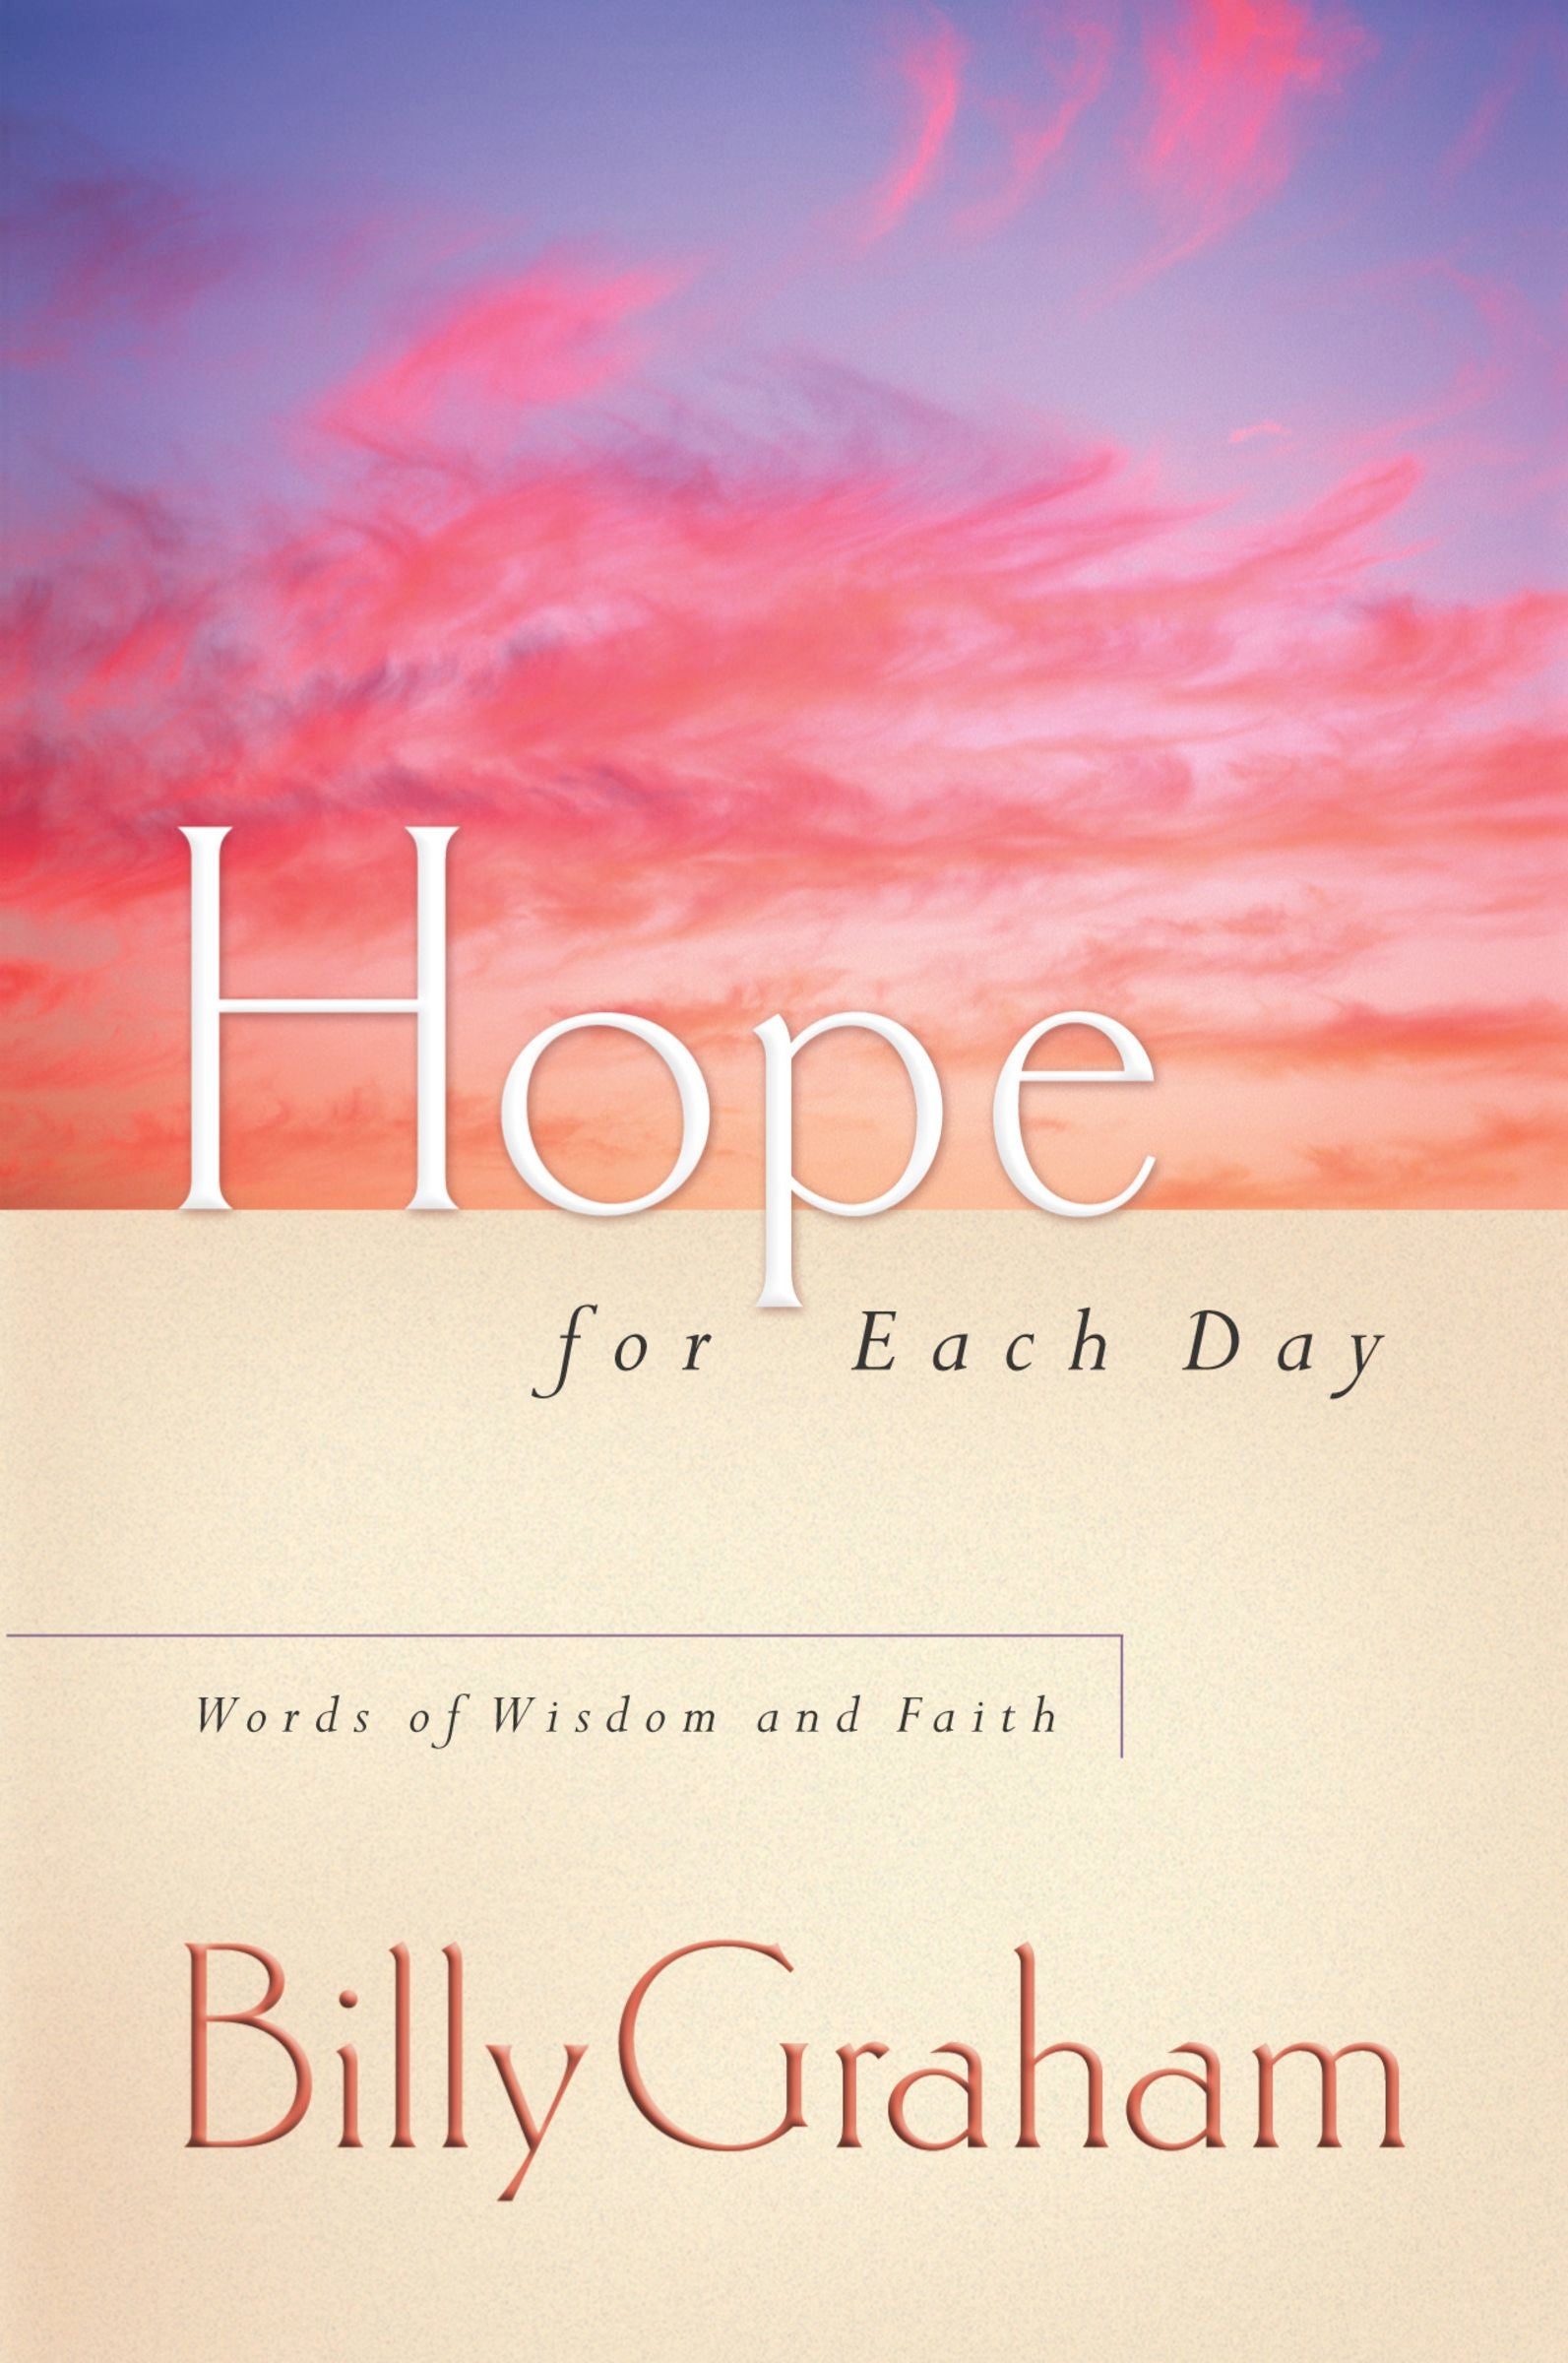 Image of Hope for Each Day other